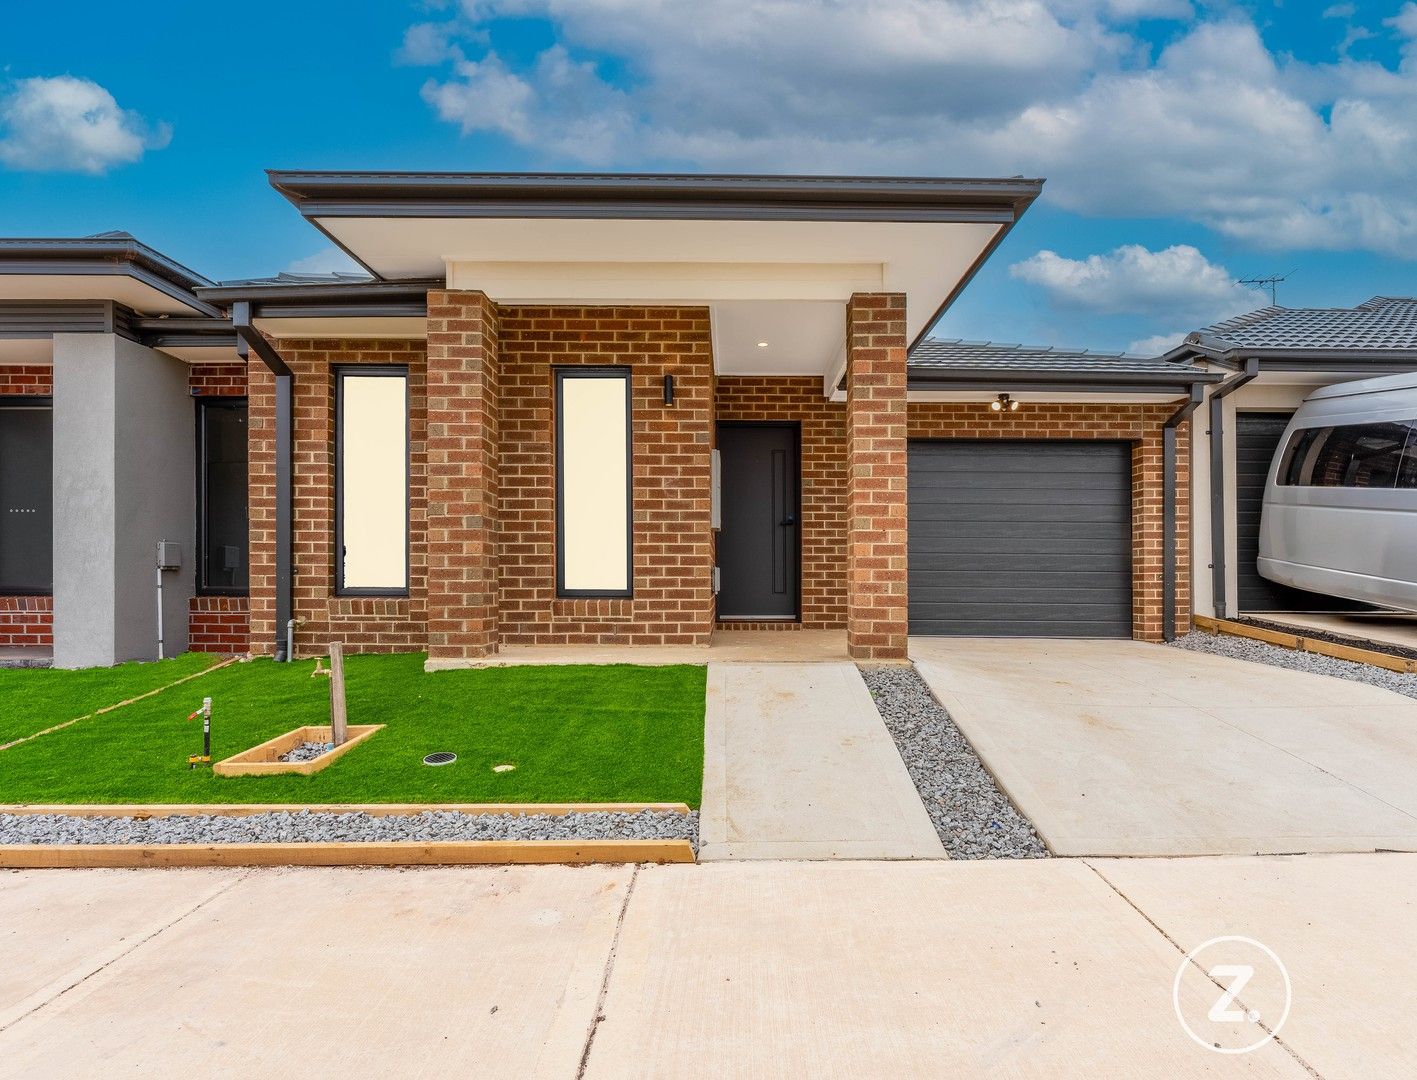 4 bedrooms House in 30 Stonneyburn Rd THORNHILL PARK VIC, 3335